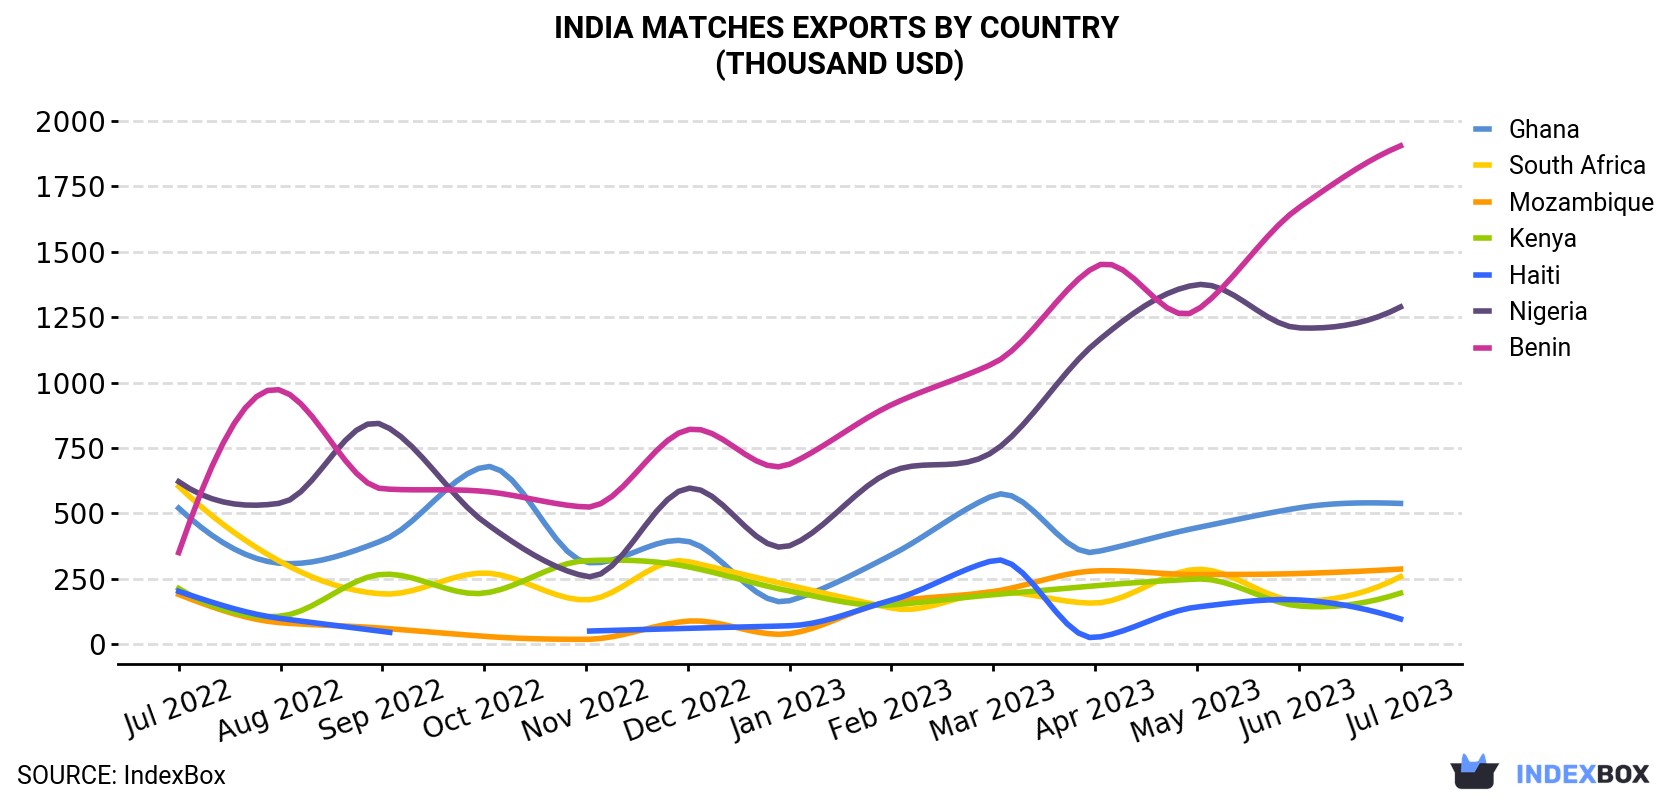 India Matches Exports By Country (Thousand USD)